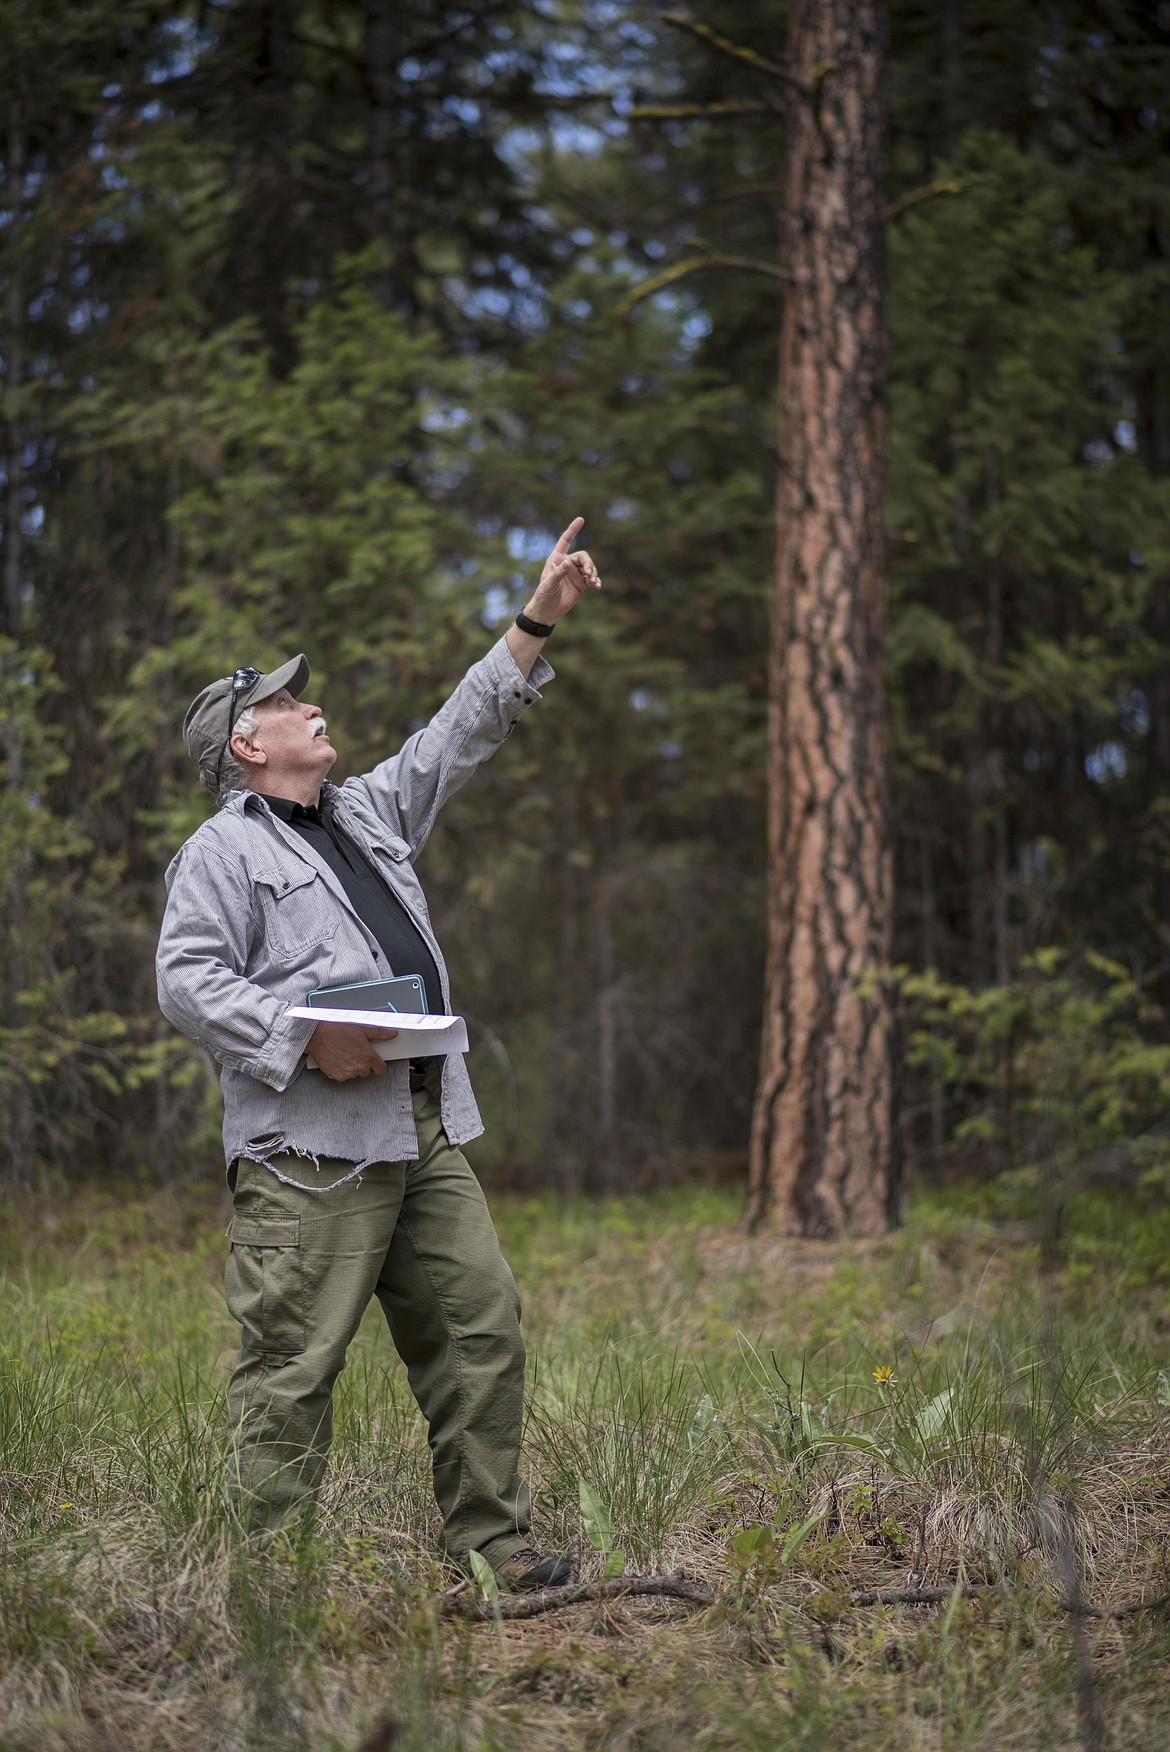 Tim Bumgarner, Libby district fuels specialist, talks about how when smaller trees closer to the ground catch fire they can ignite larger trees during forest fires, May 8 during a a field trip to the proposed Ripley Project area in Lincoln County. (Luke Hollister/The Western News)